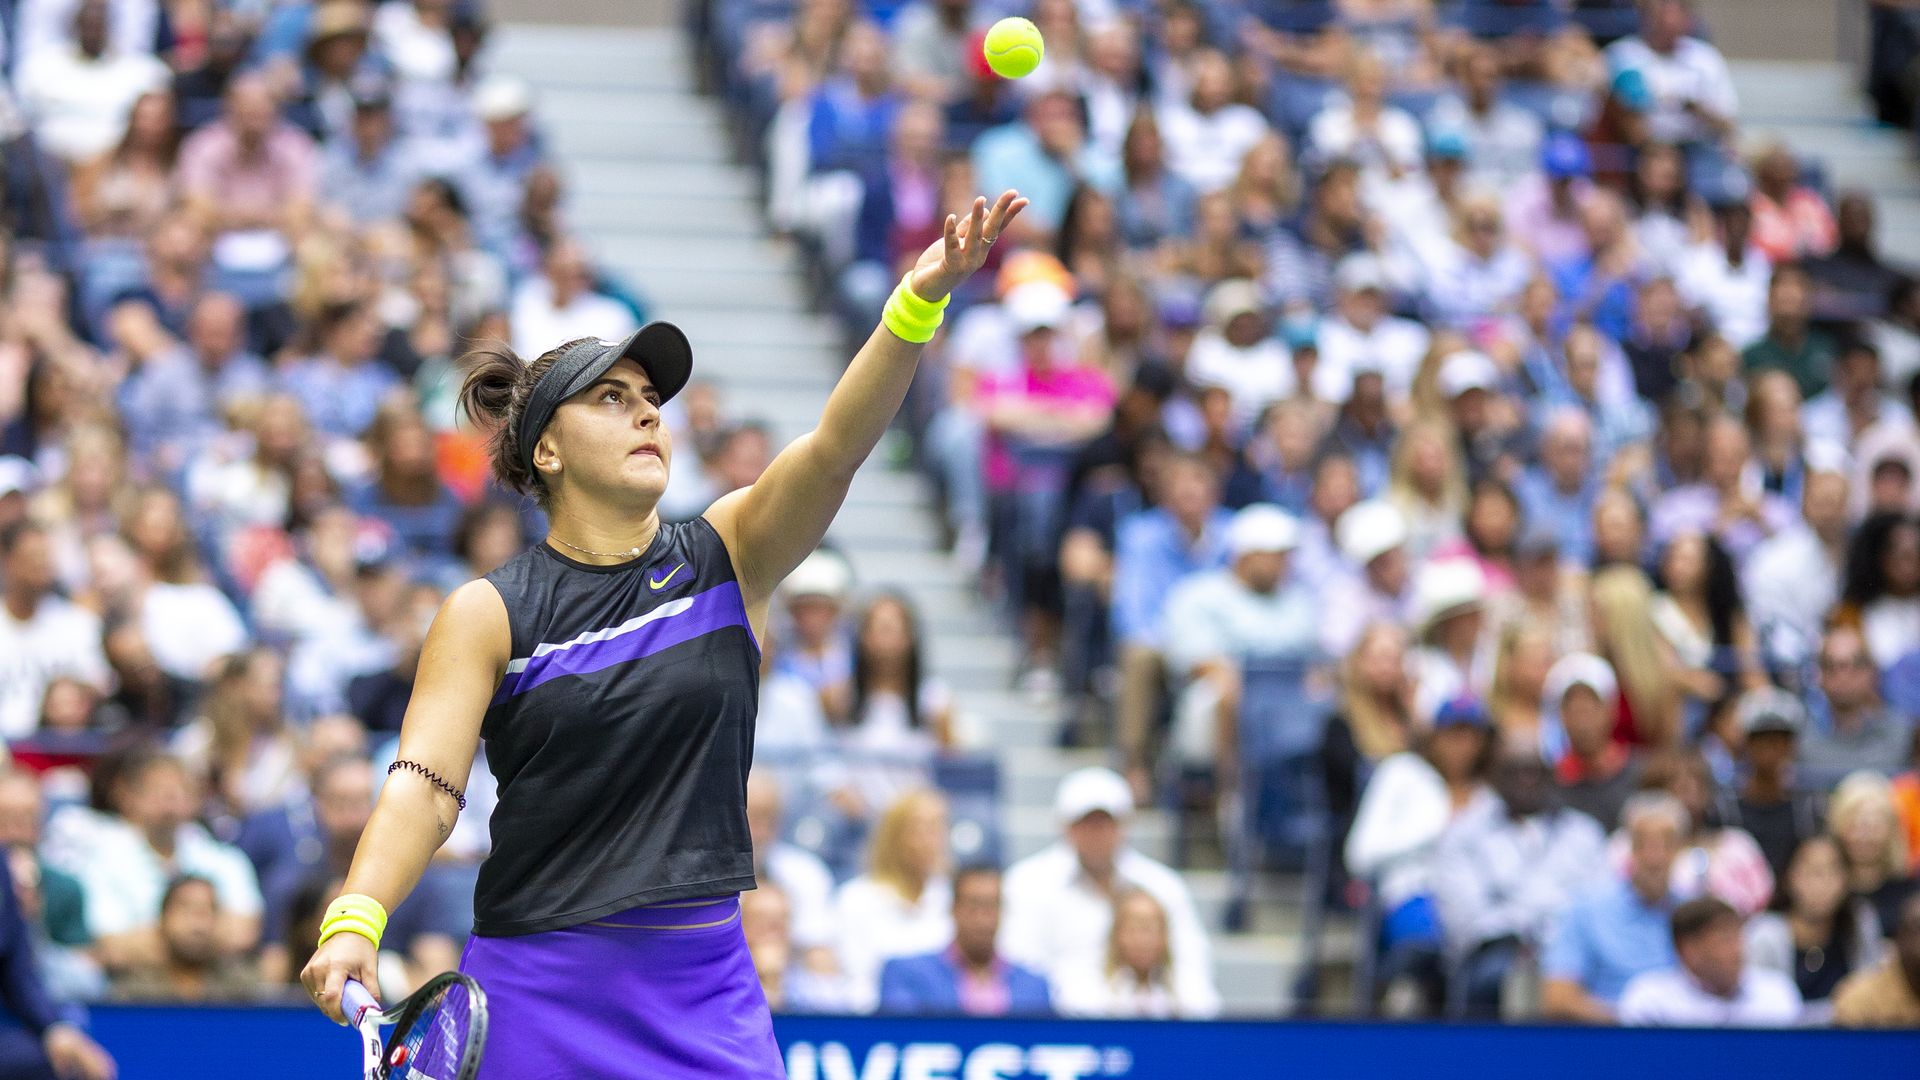 Bianca Andreescu of Canada in action against Serena Williams of the United States in the Women's Singles Final on Arthur Ashe Stadium during the 2019